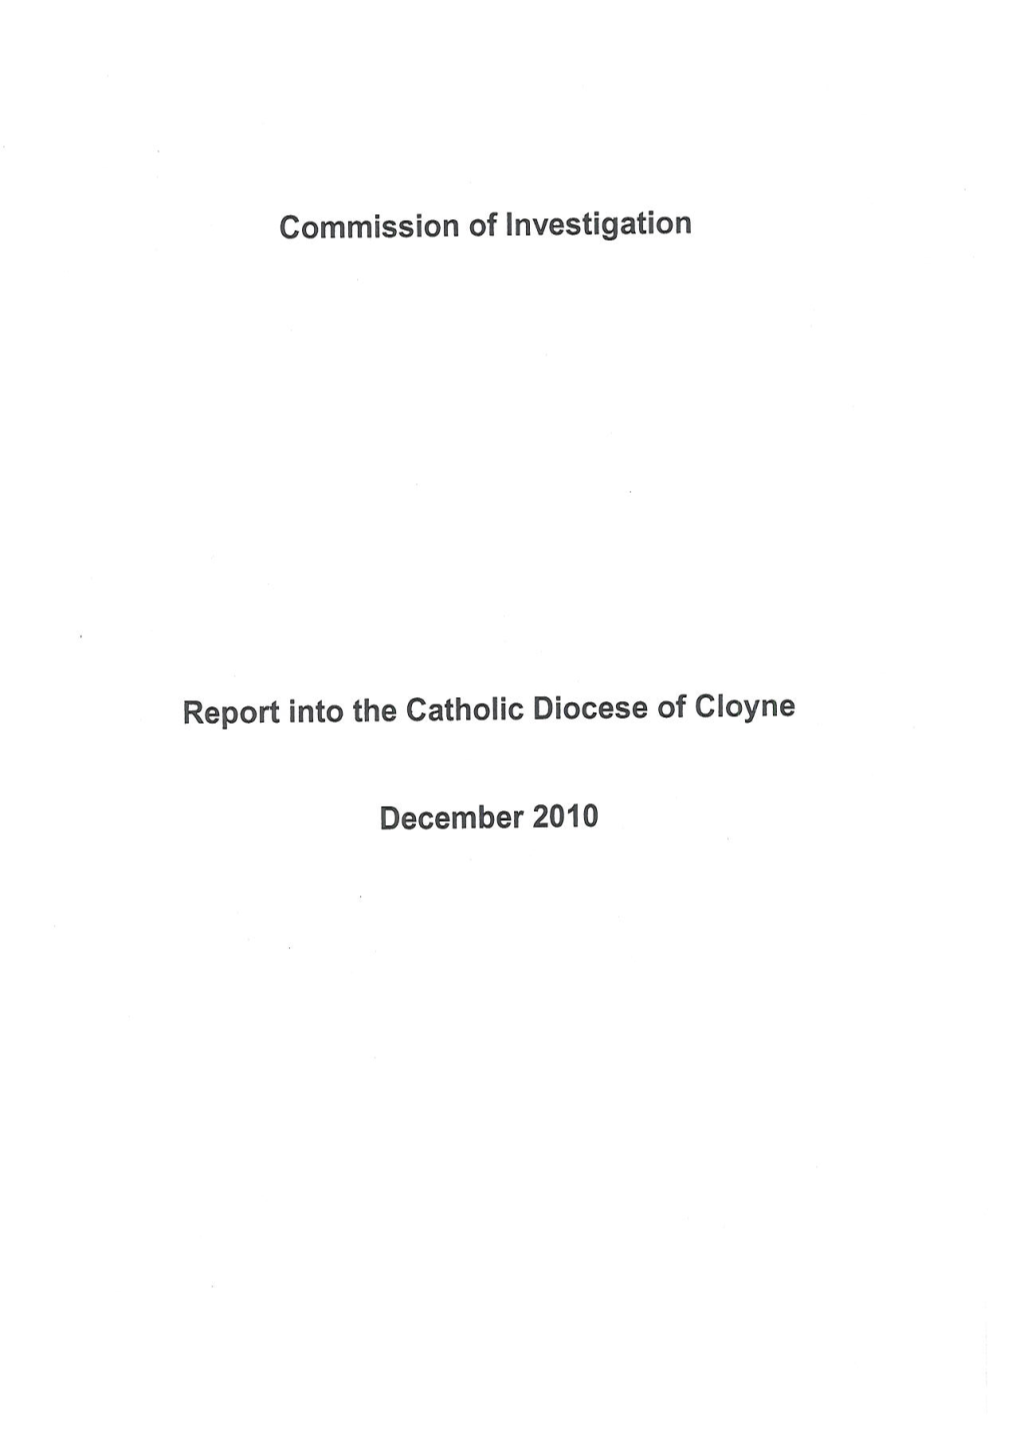 Report Into the Catholic Diocese of Cloyne